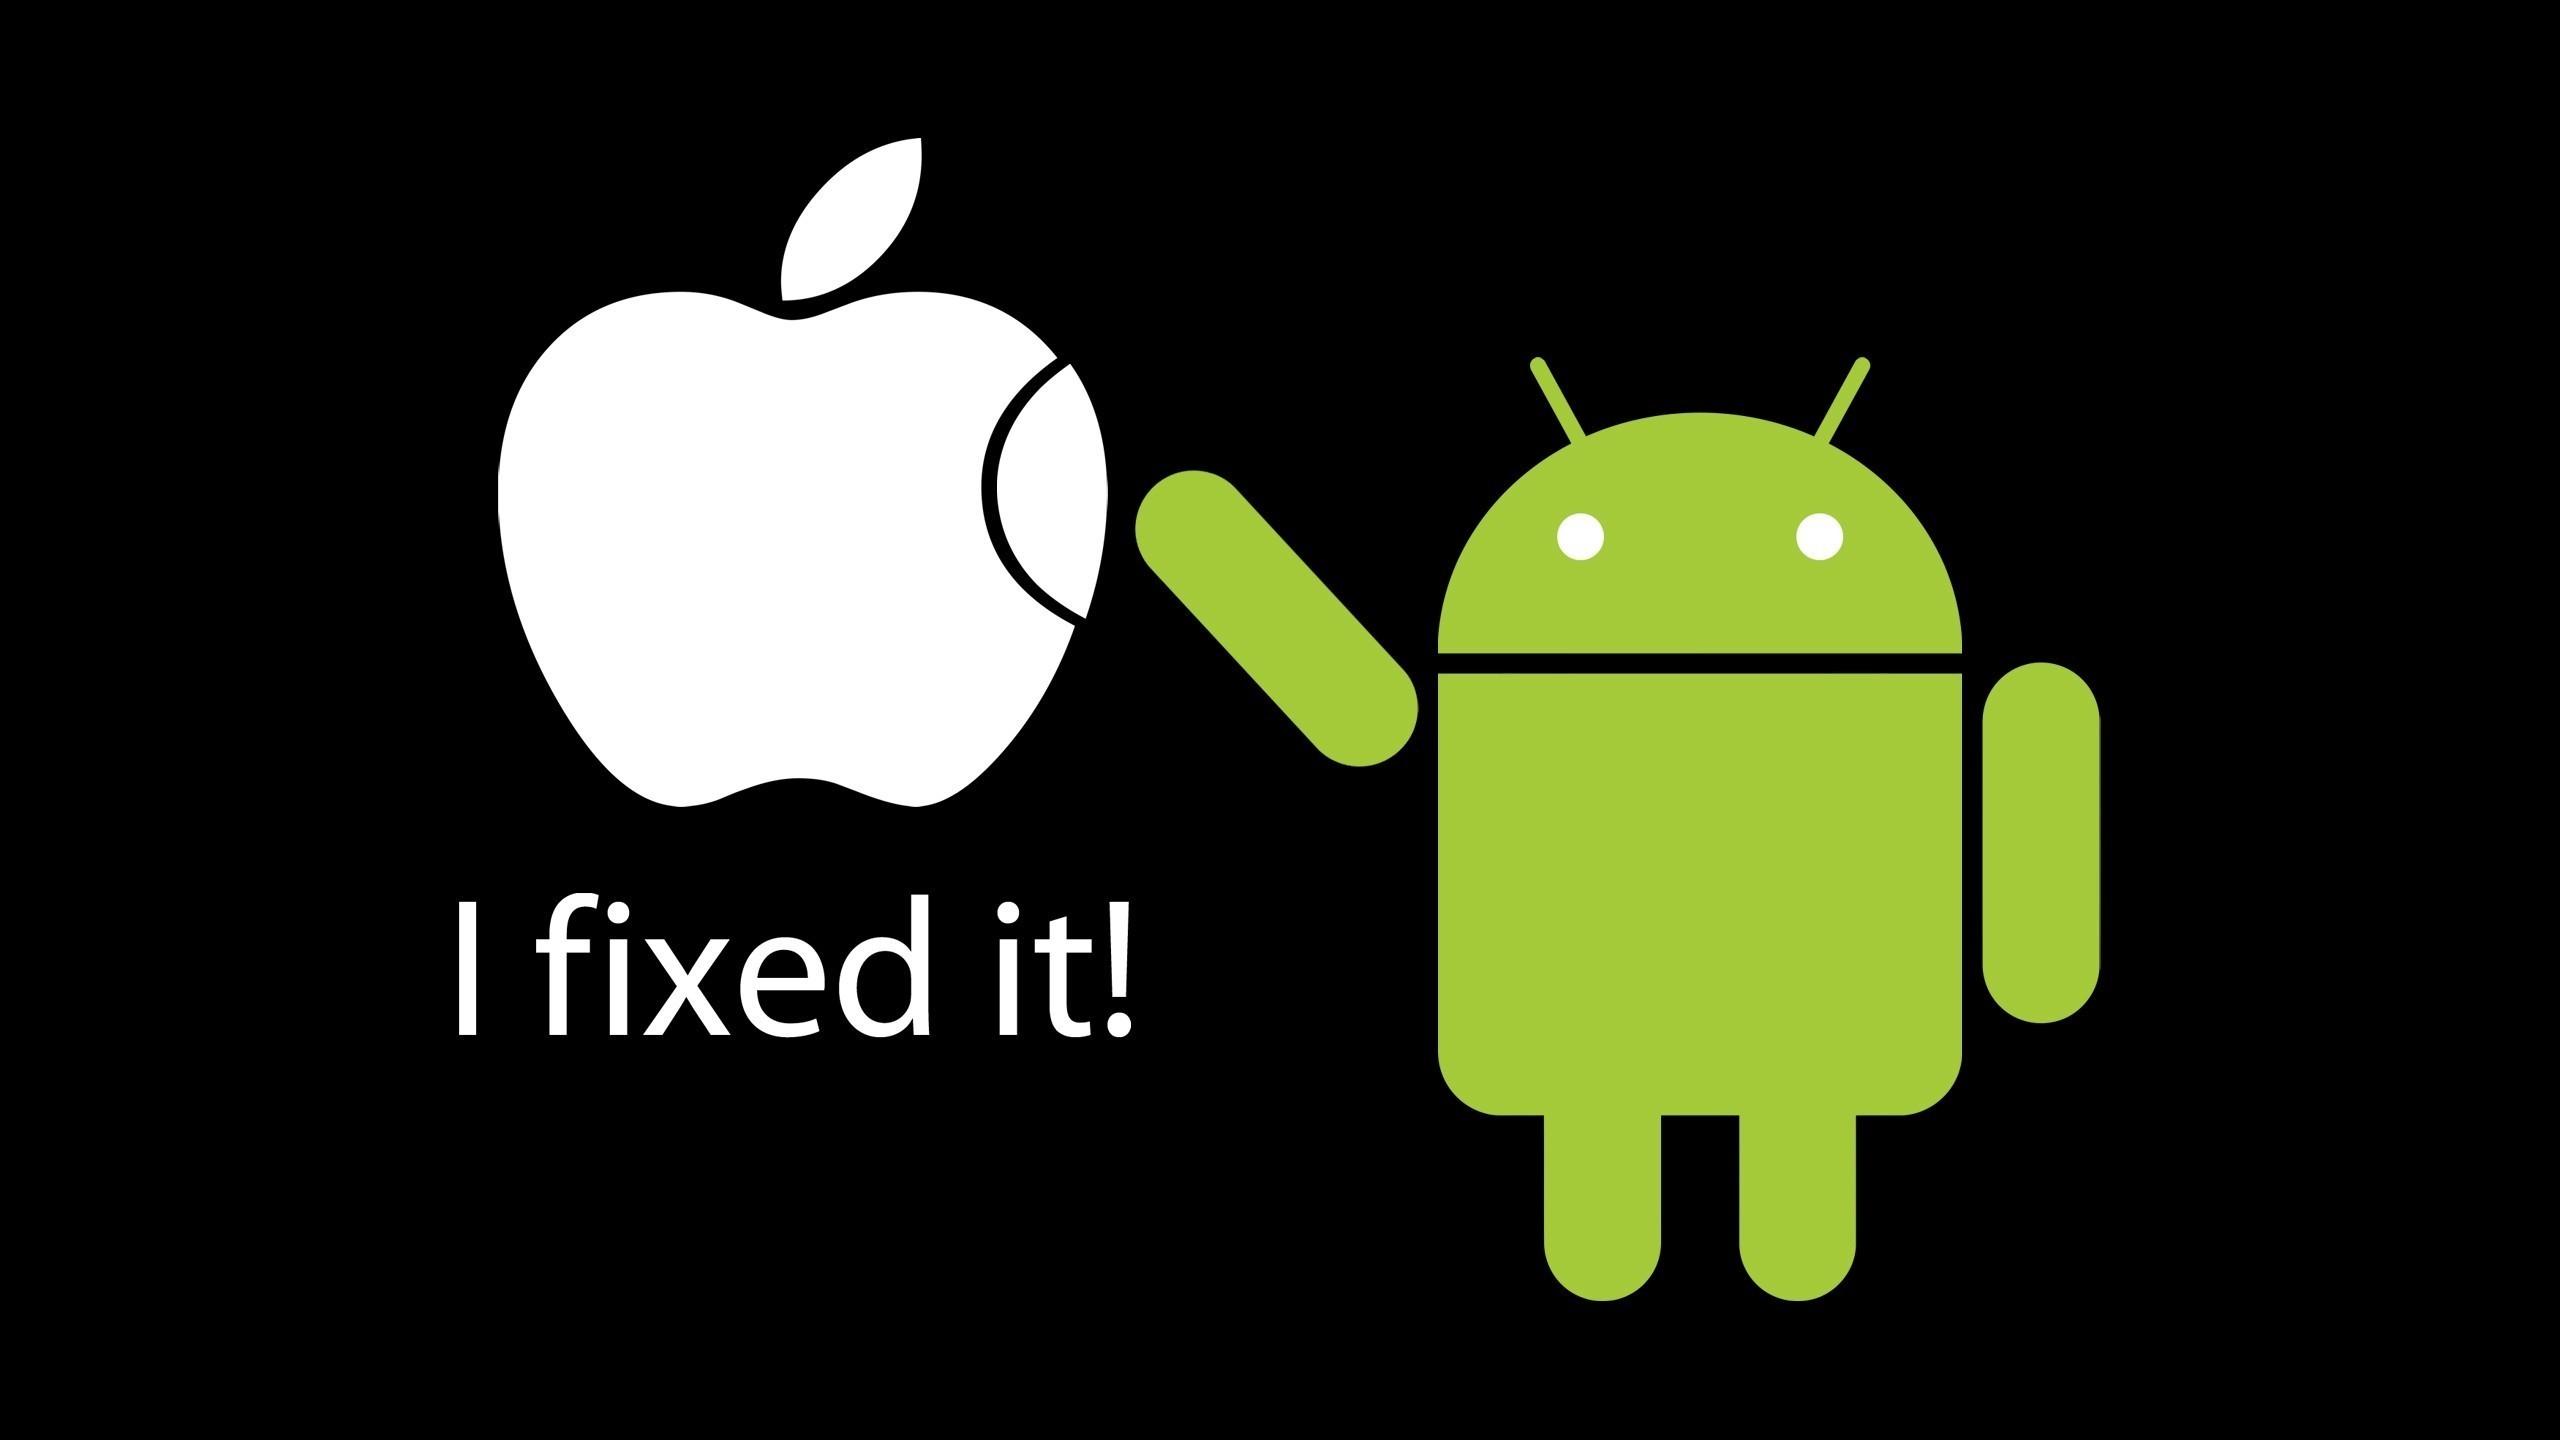 Fixed Apple by Android for 2560x1440 HDTV resolution